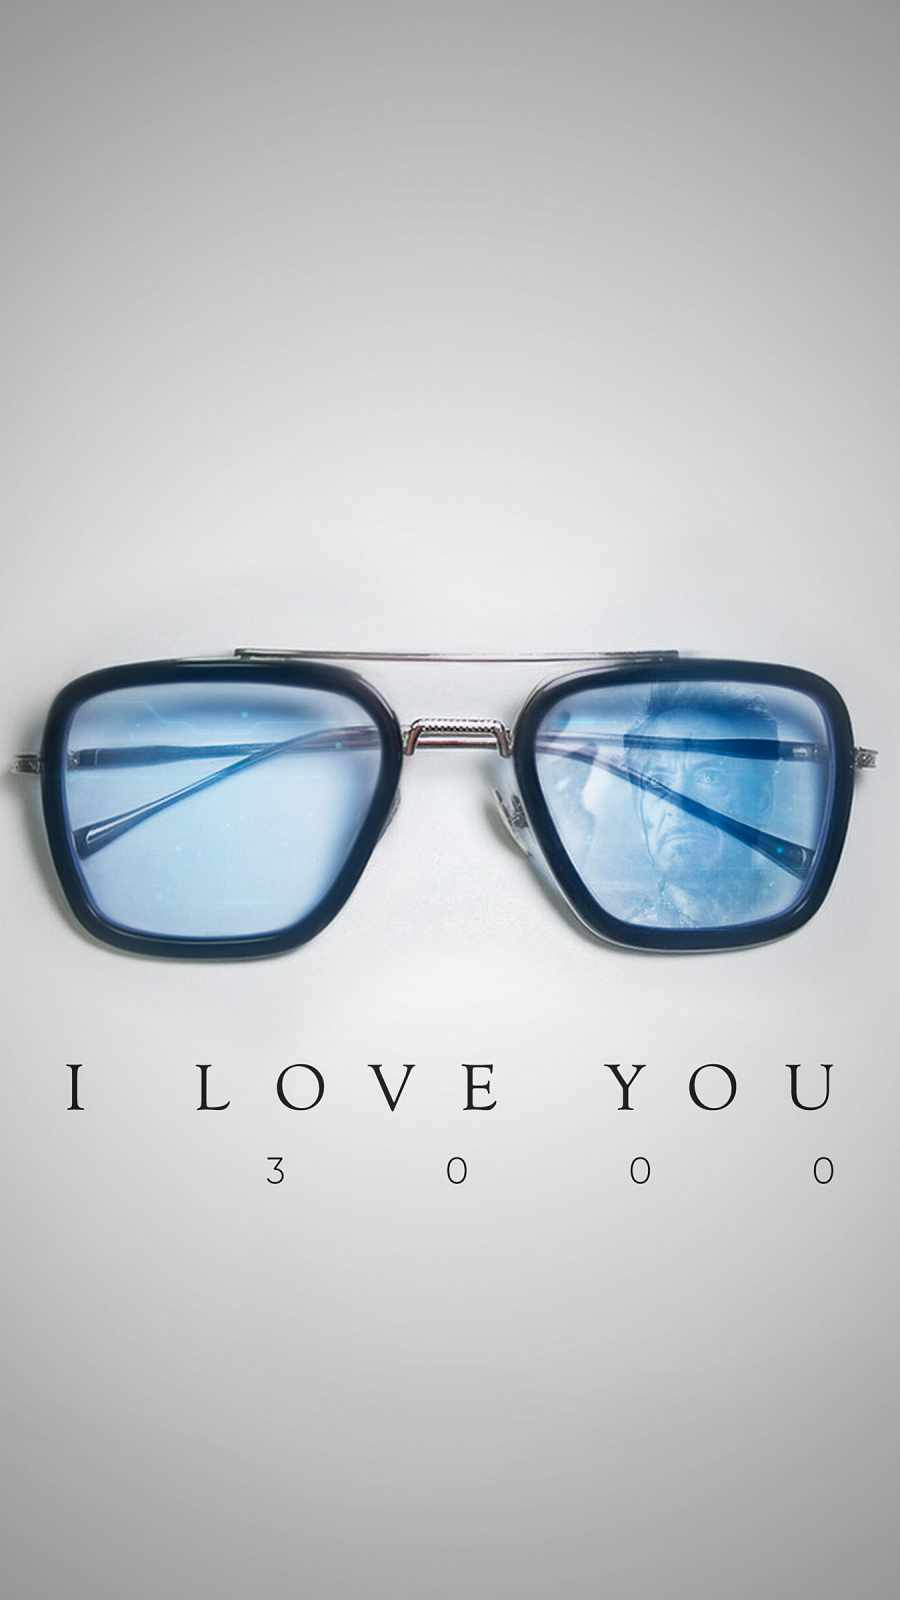 I Love You 3K IPhone Wallpaper  IPhone Wallpapers